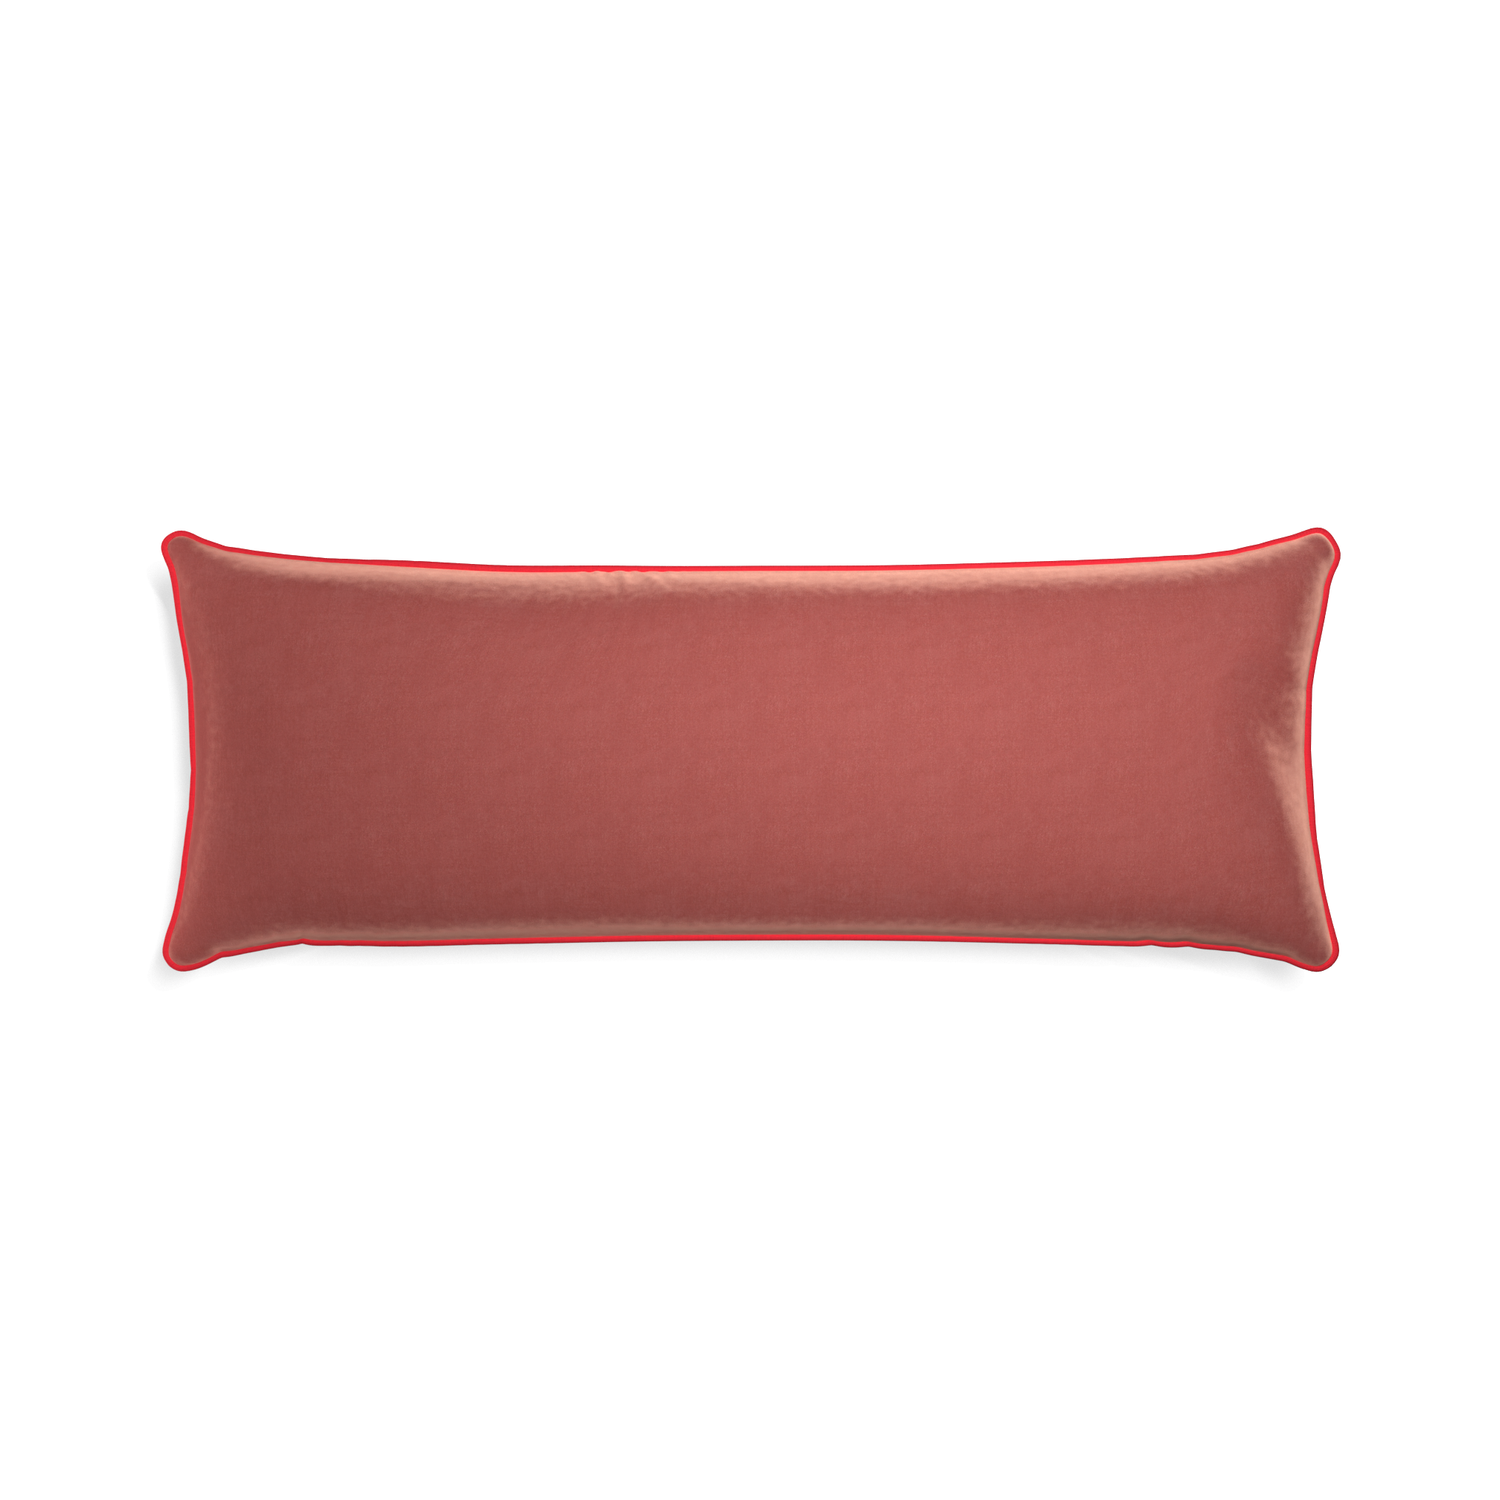 Xl-lumbar cosmo velvet custom coralpillow with cherry piping on white background